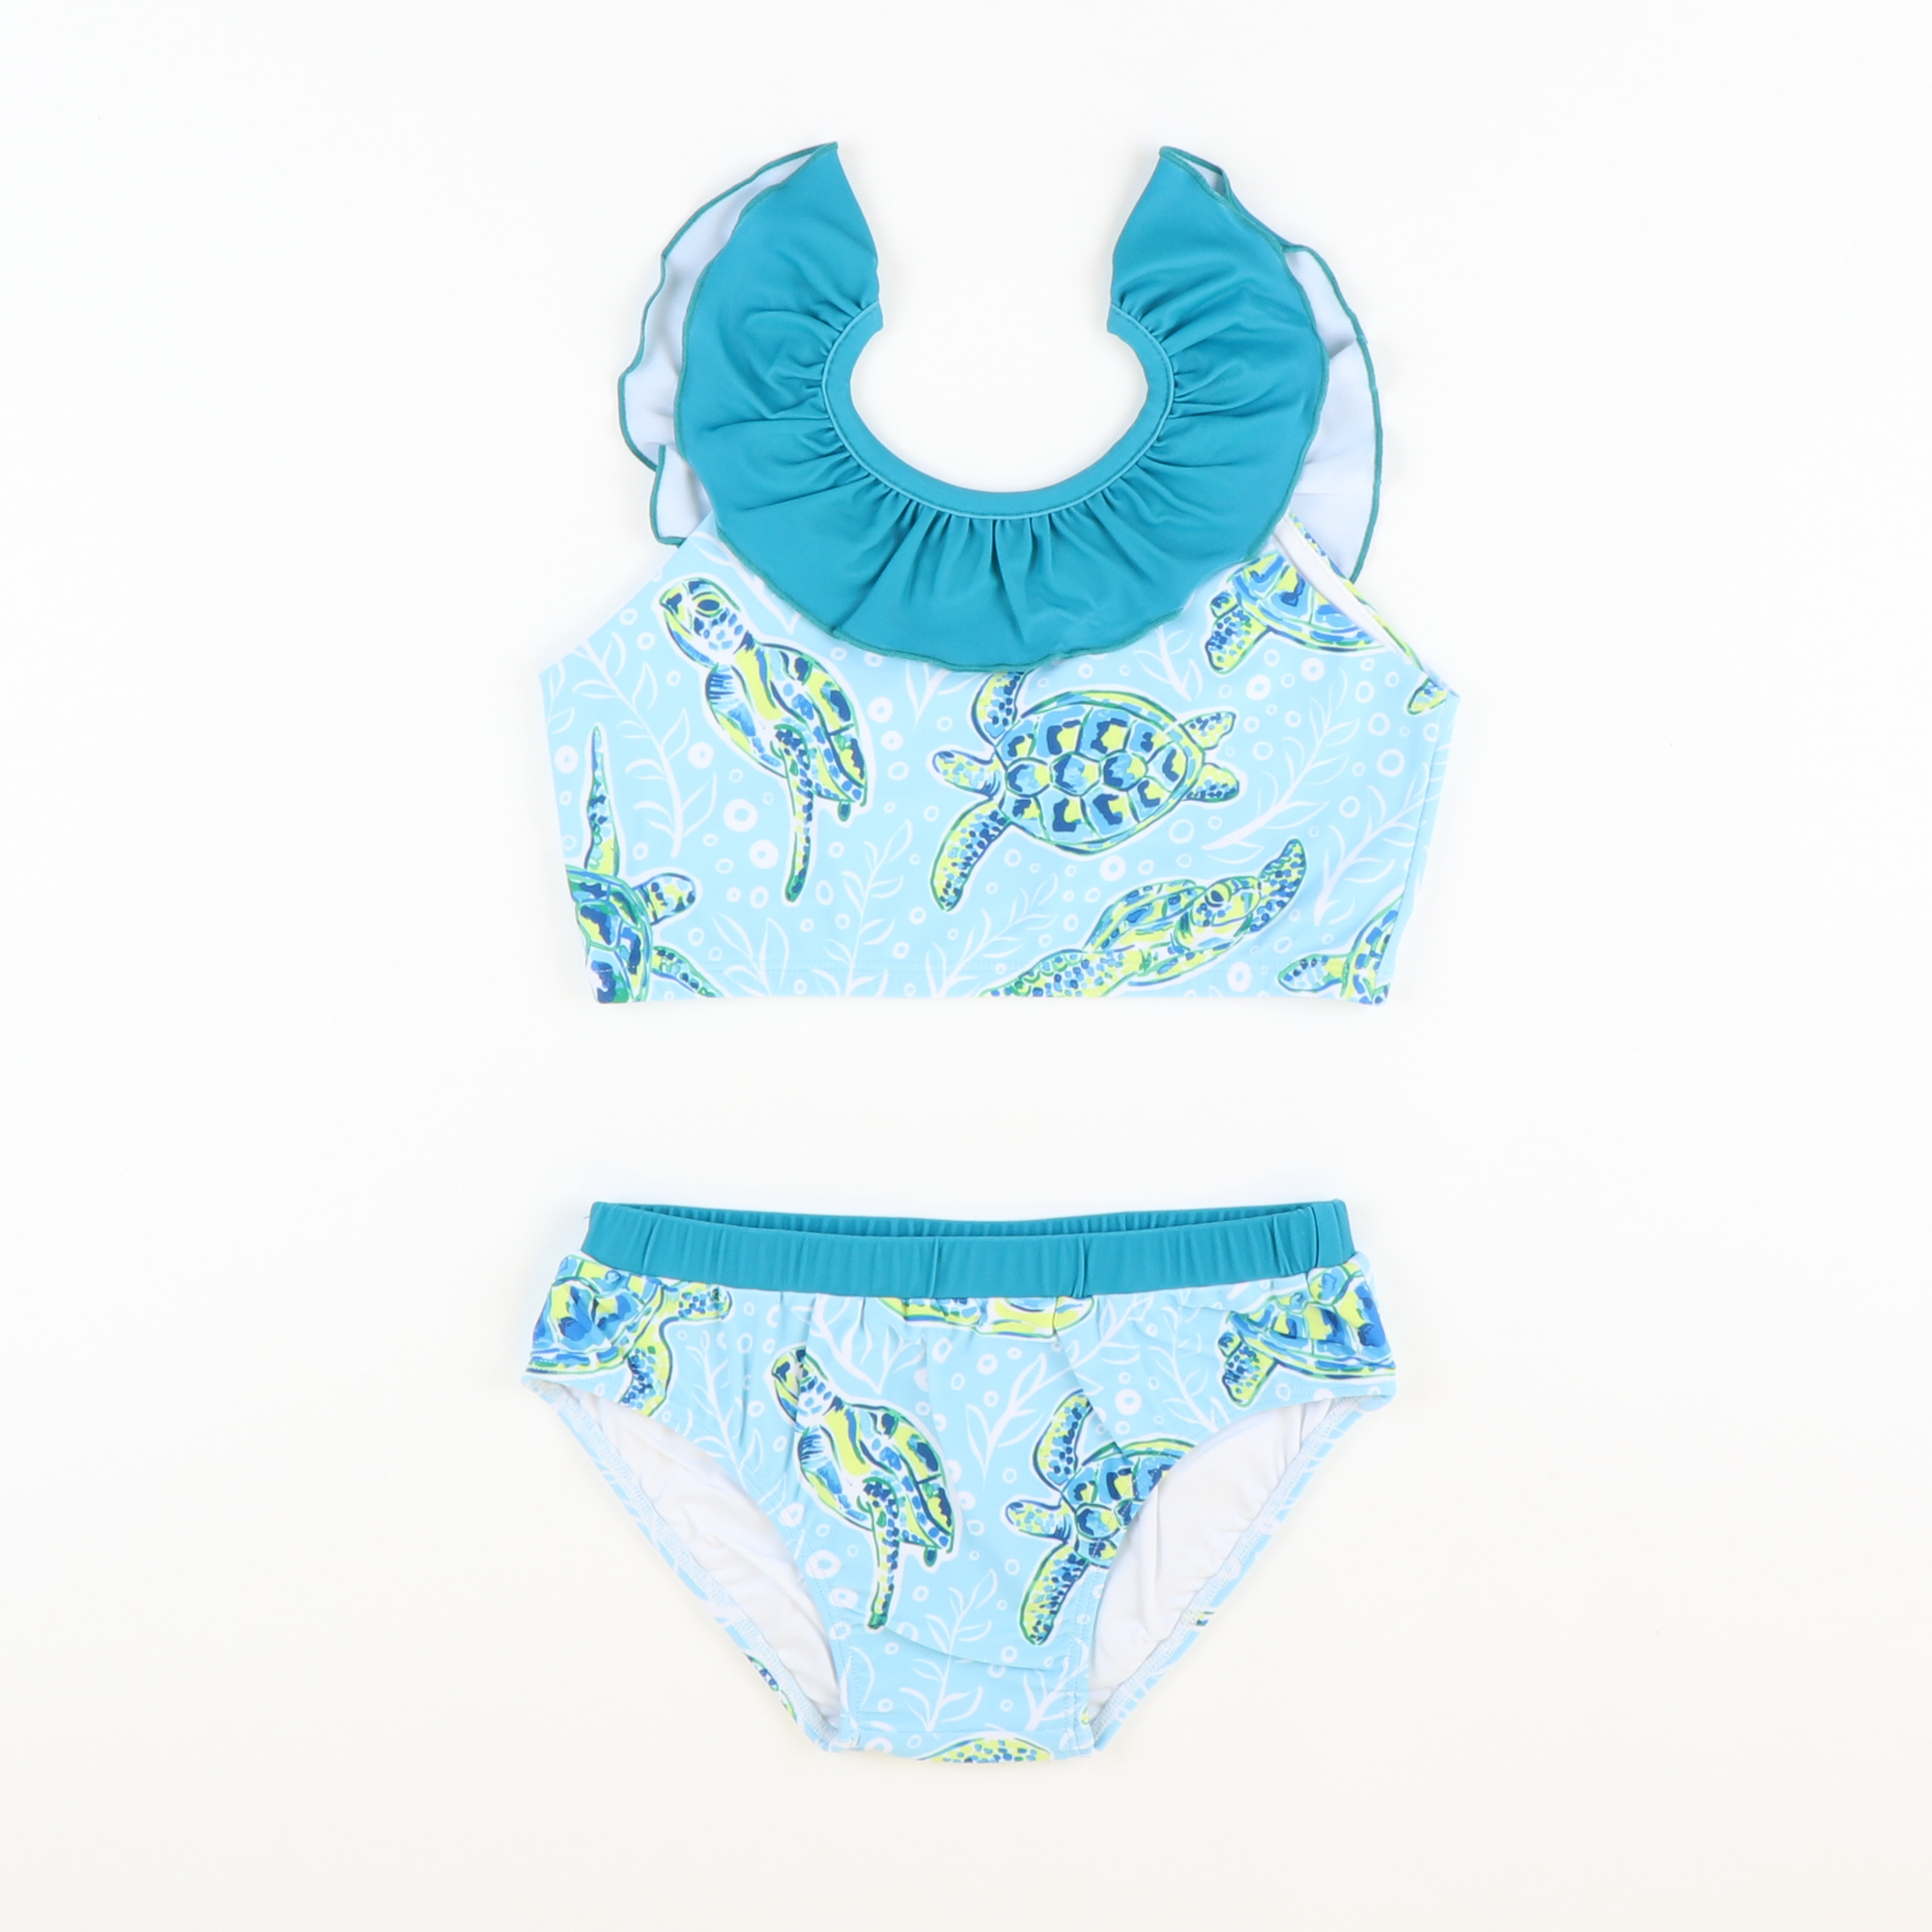 Sea Turtles Ruffle Two-Piece Swimsuit - Stellybelly